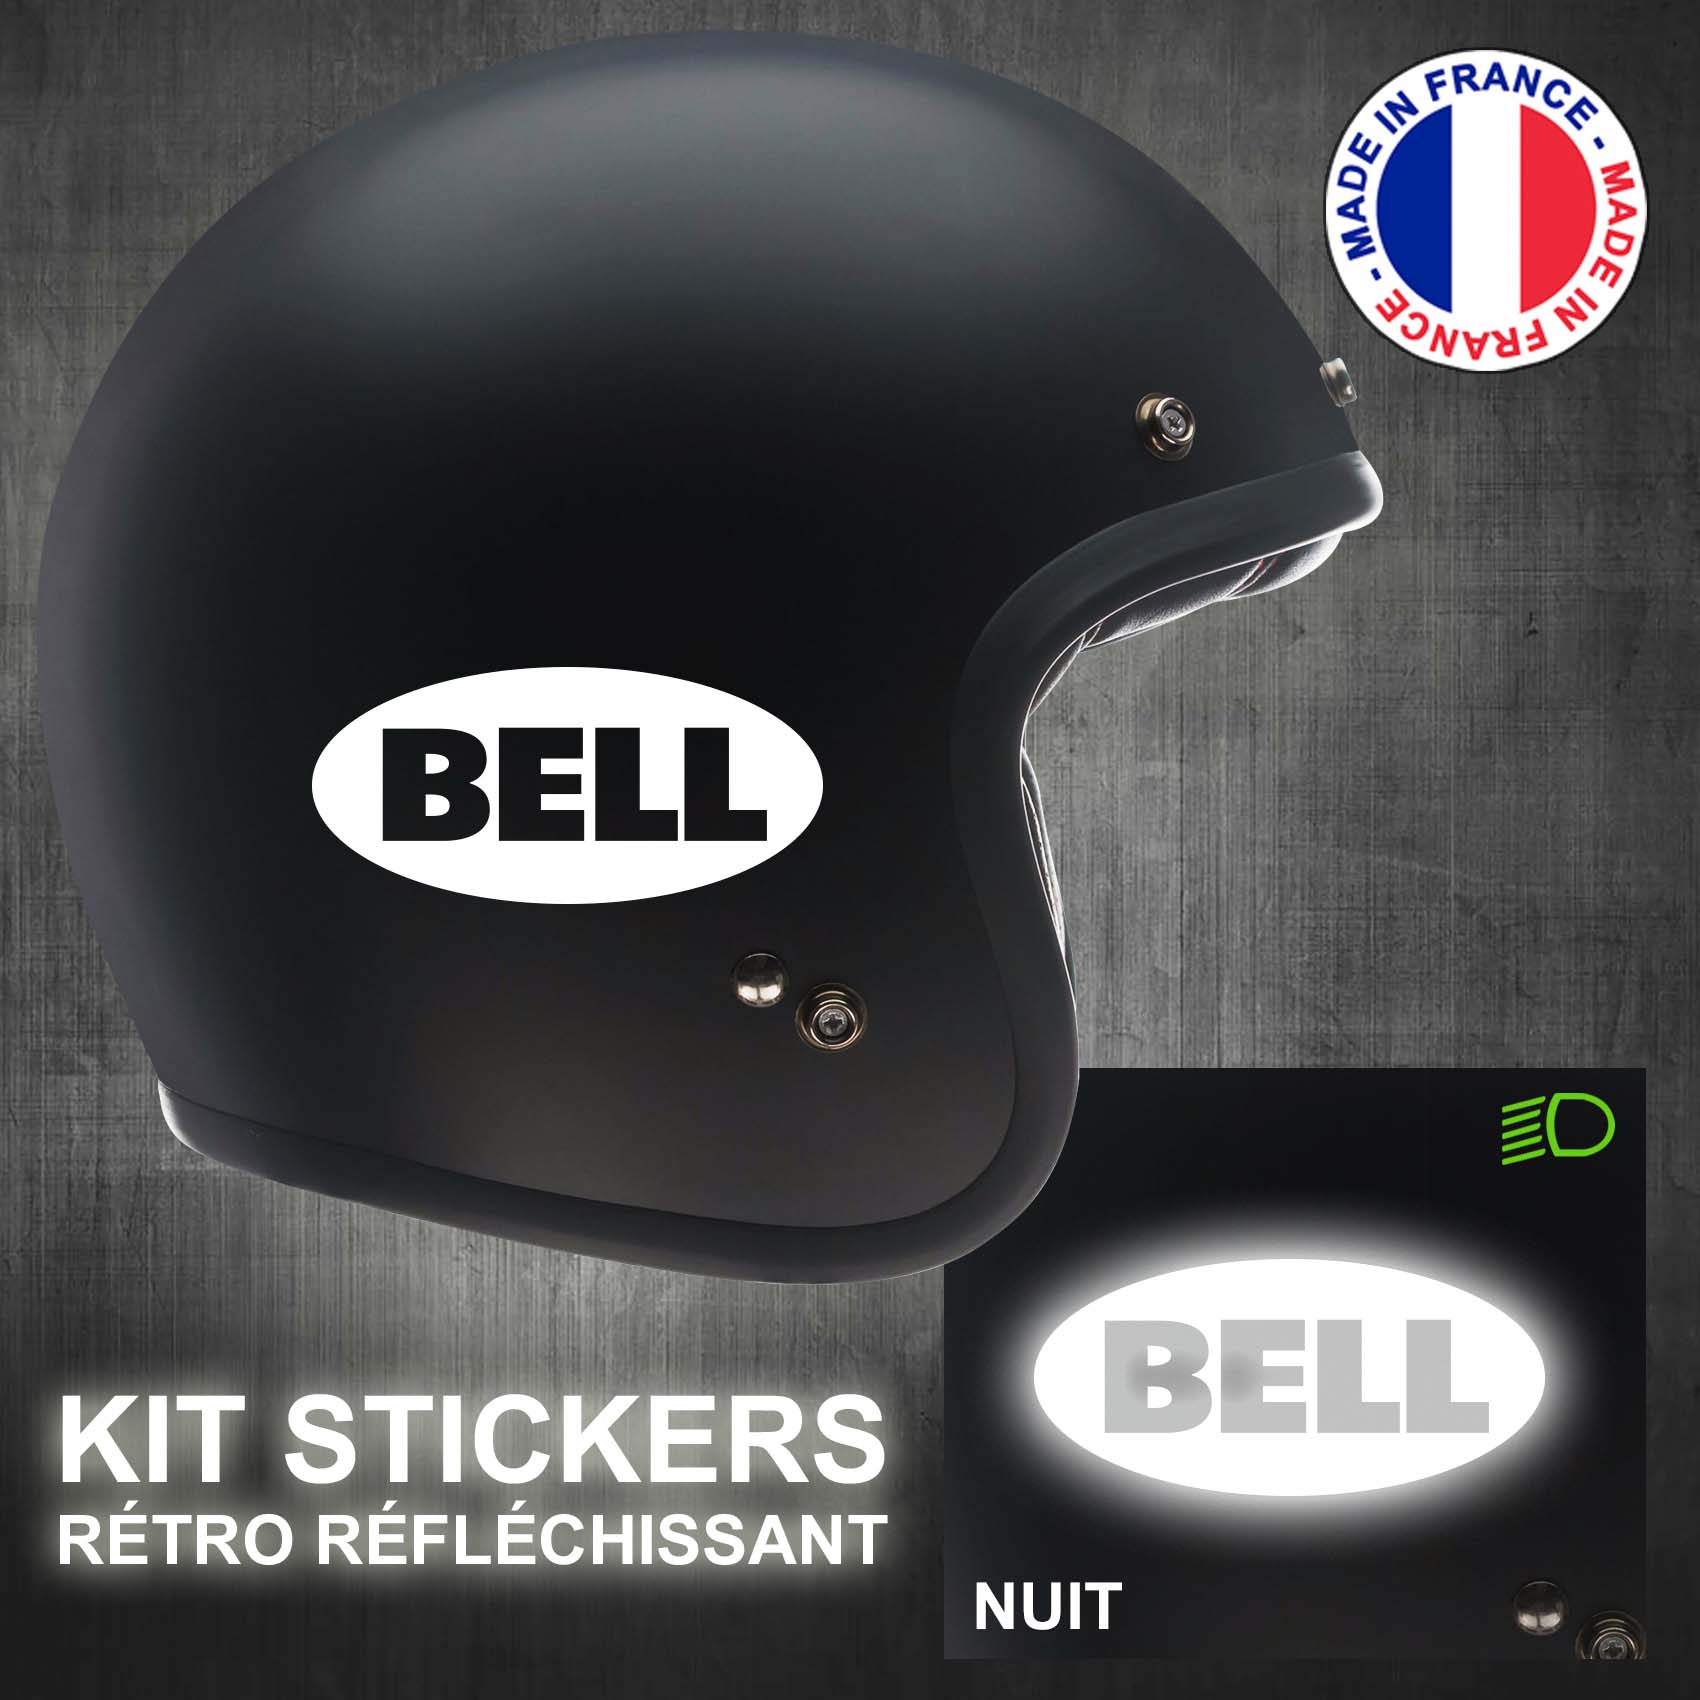 stickers-casque-moto-bell-ref2-retro-reflechissant-autocollant-noir-moto-velo-tuning-racing-route-sticker-casques-adhesif-scooter-nuit-securite-decals-personnalise-personnalisable-min